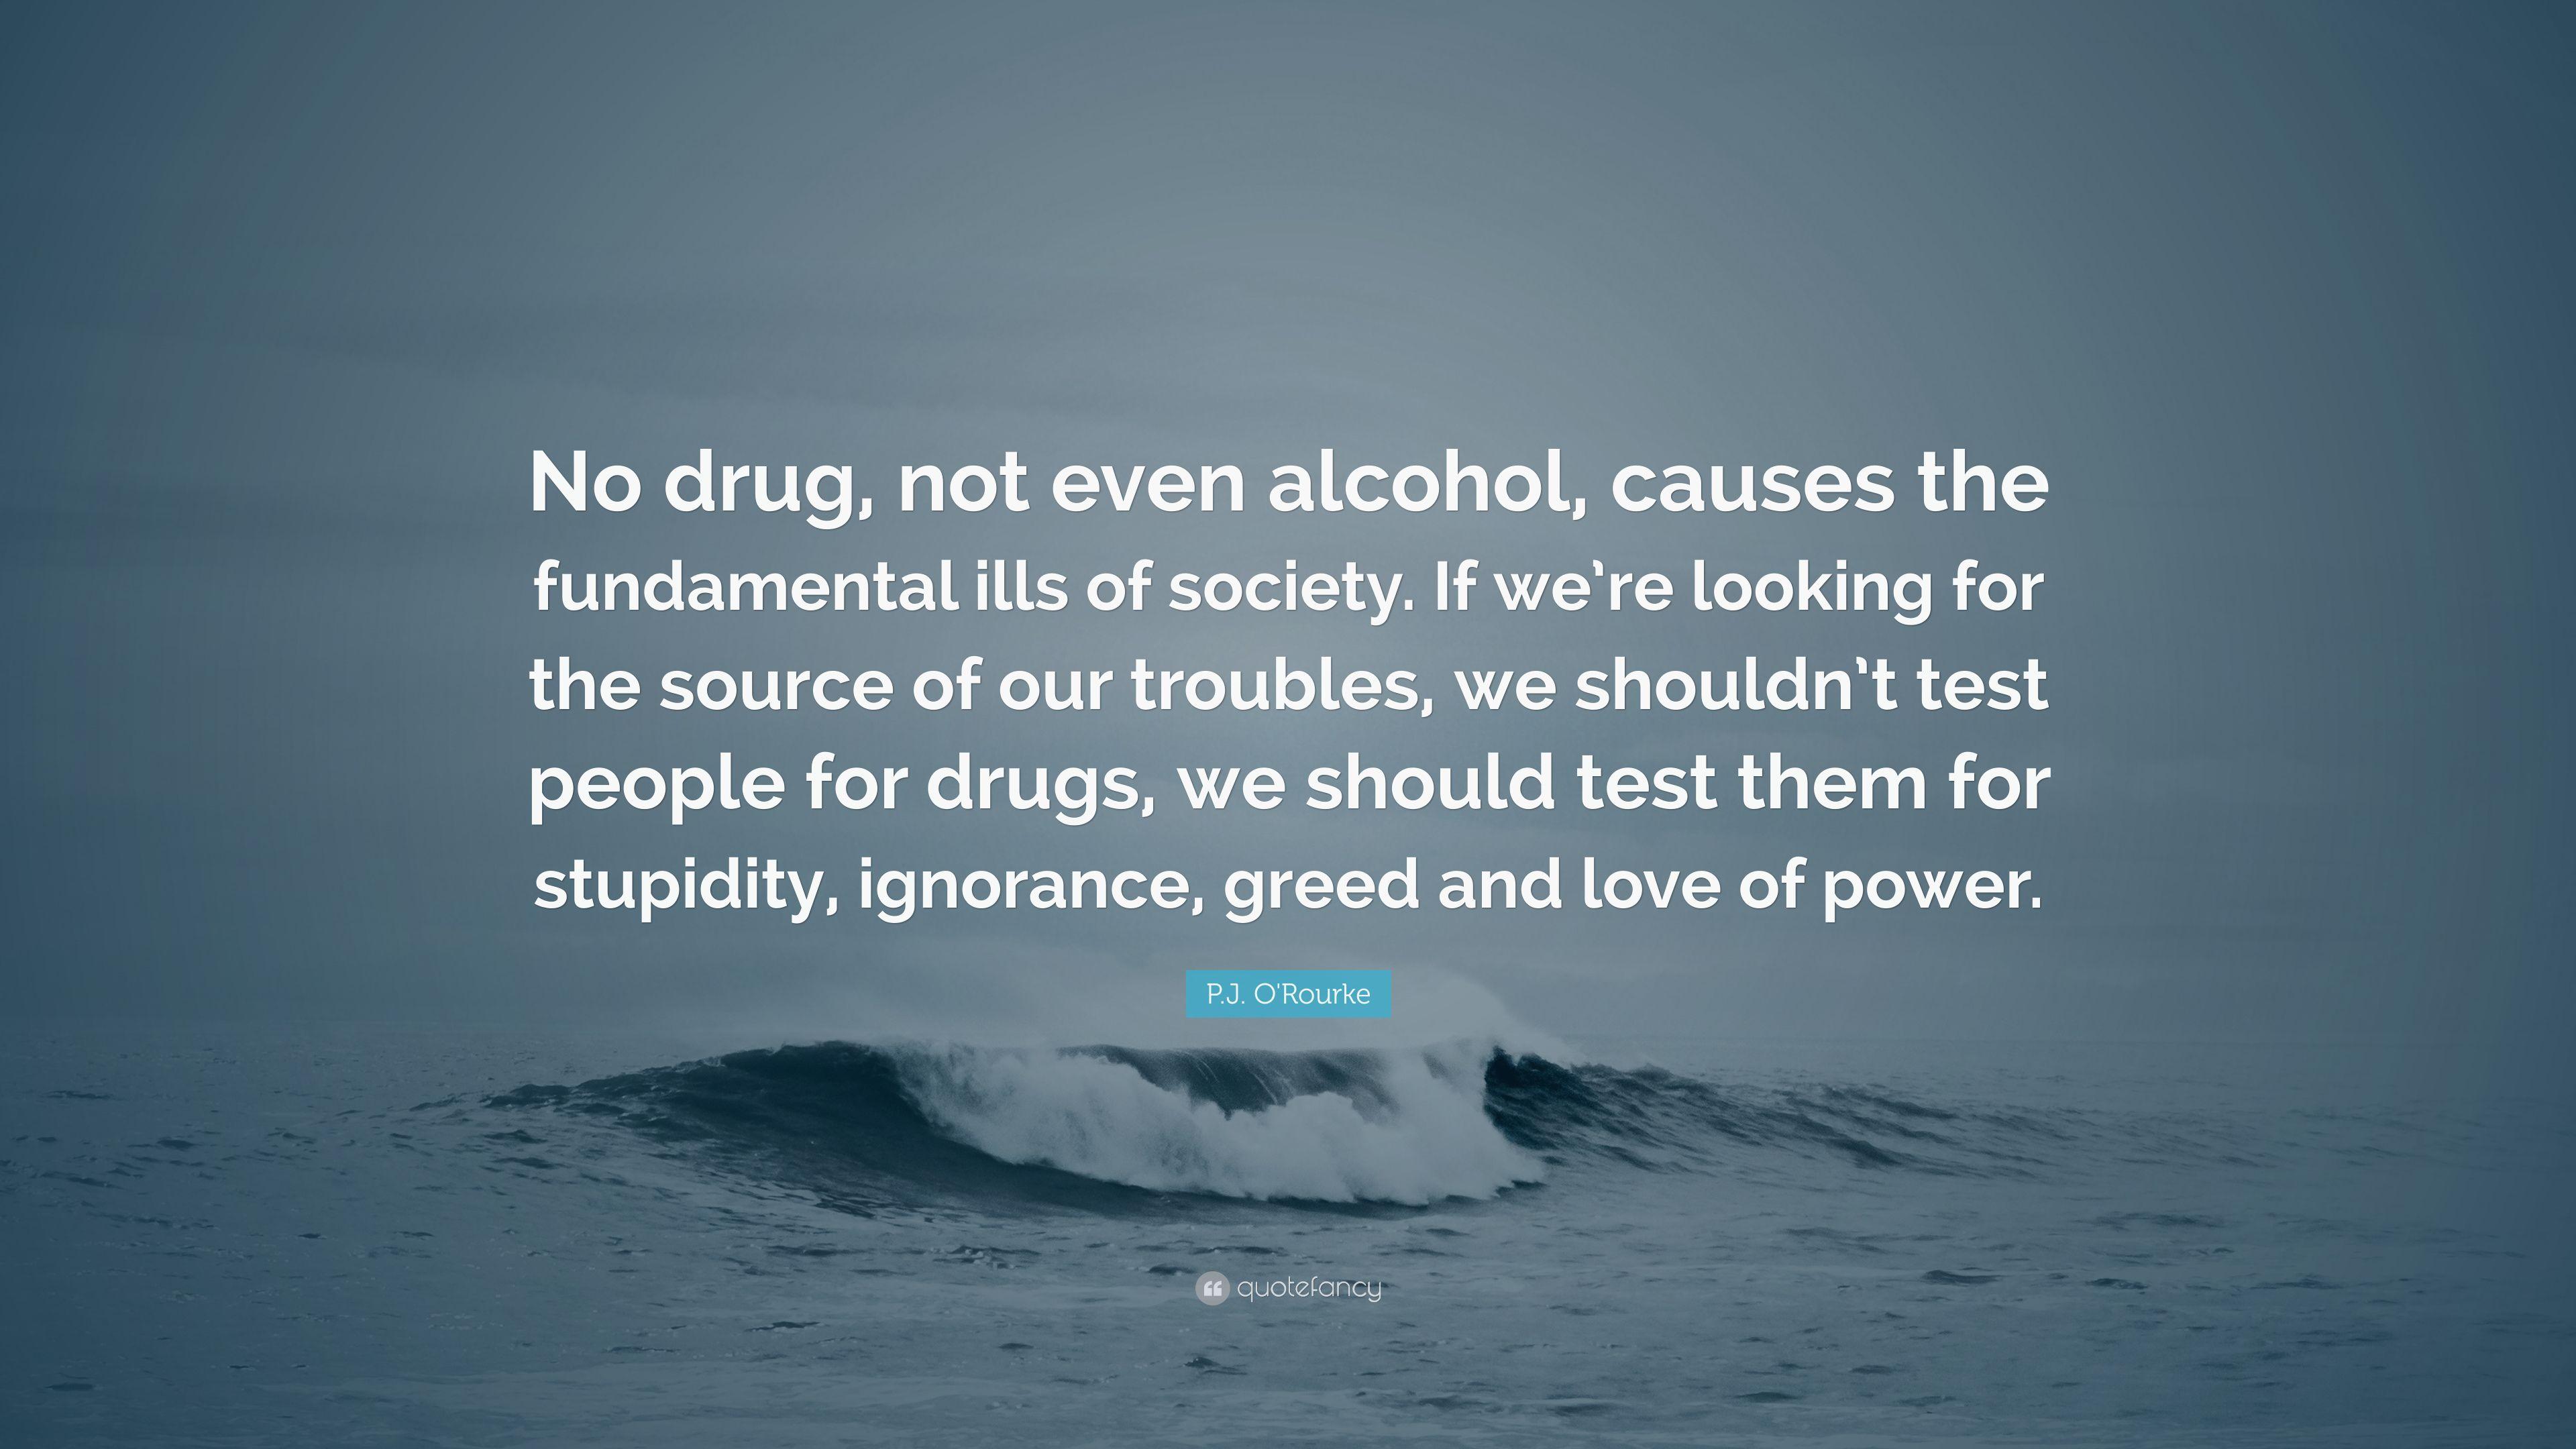 P.J. O'Rourke Quote: “No drug, not even alcohol, causes